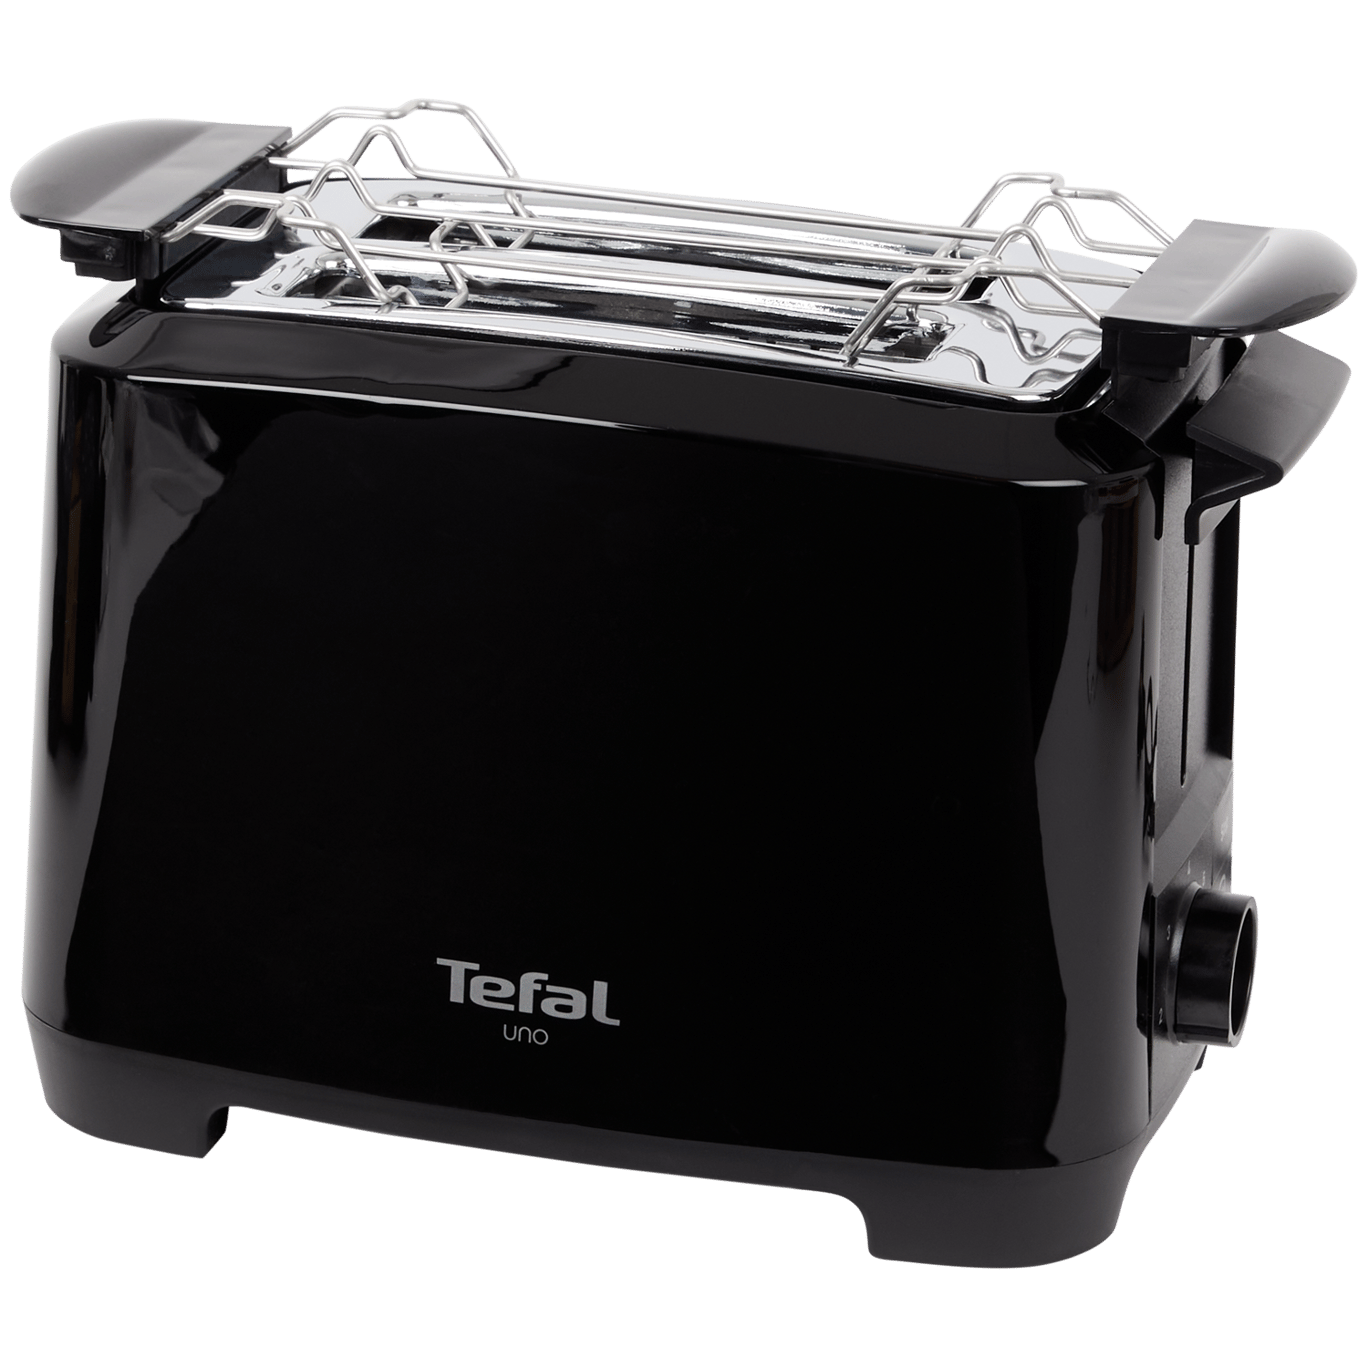 Tefal Toaster | Action.com